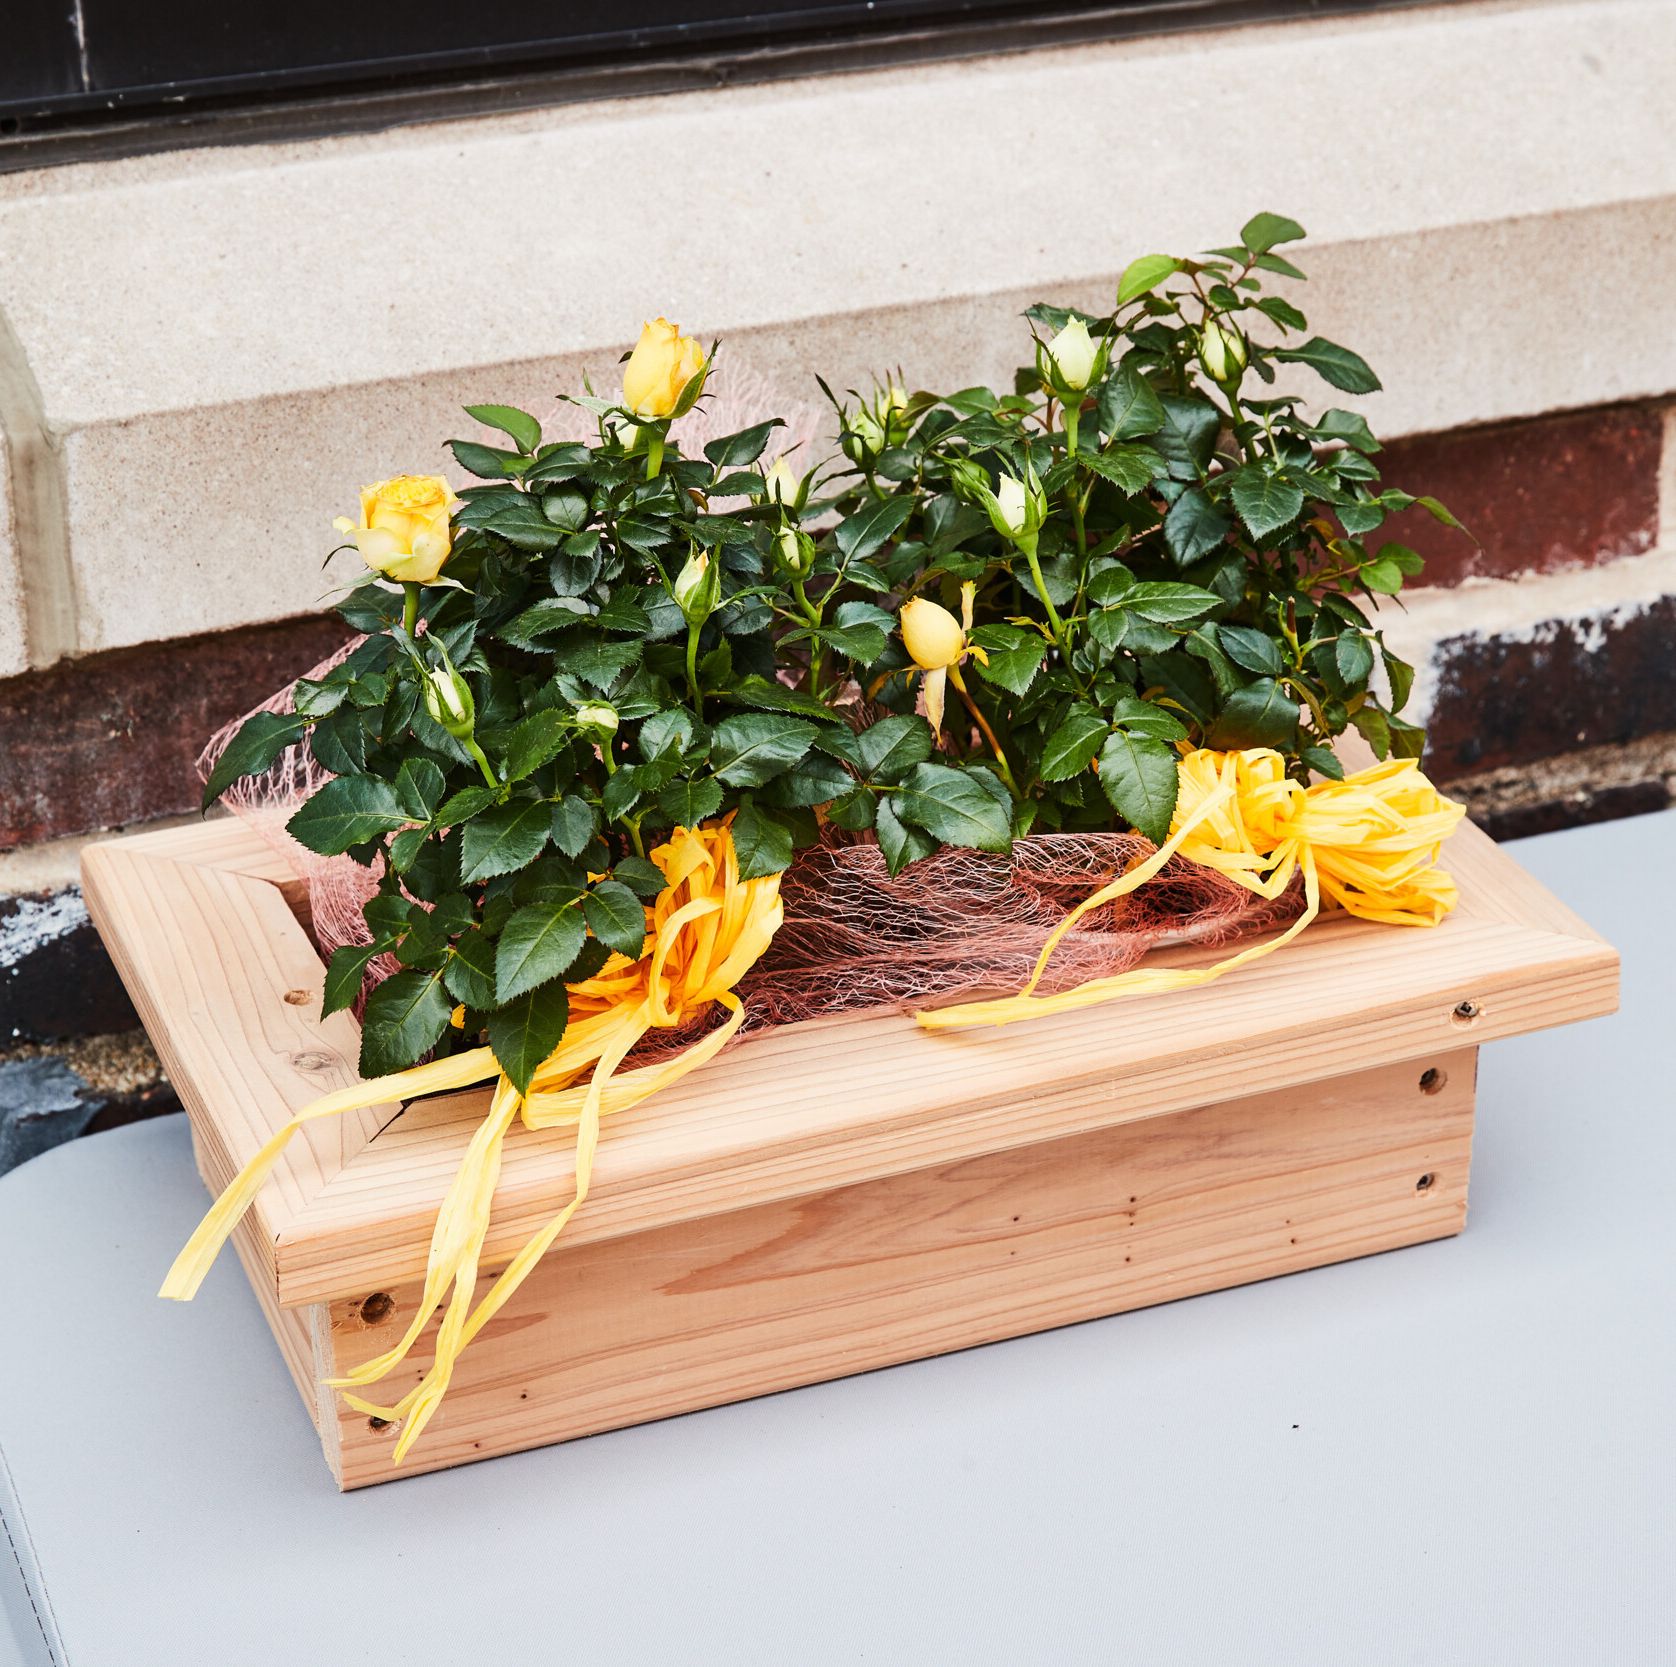 Two-Tool Project: Build a Cedar Planter